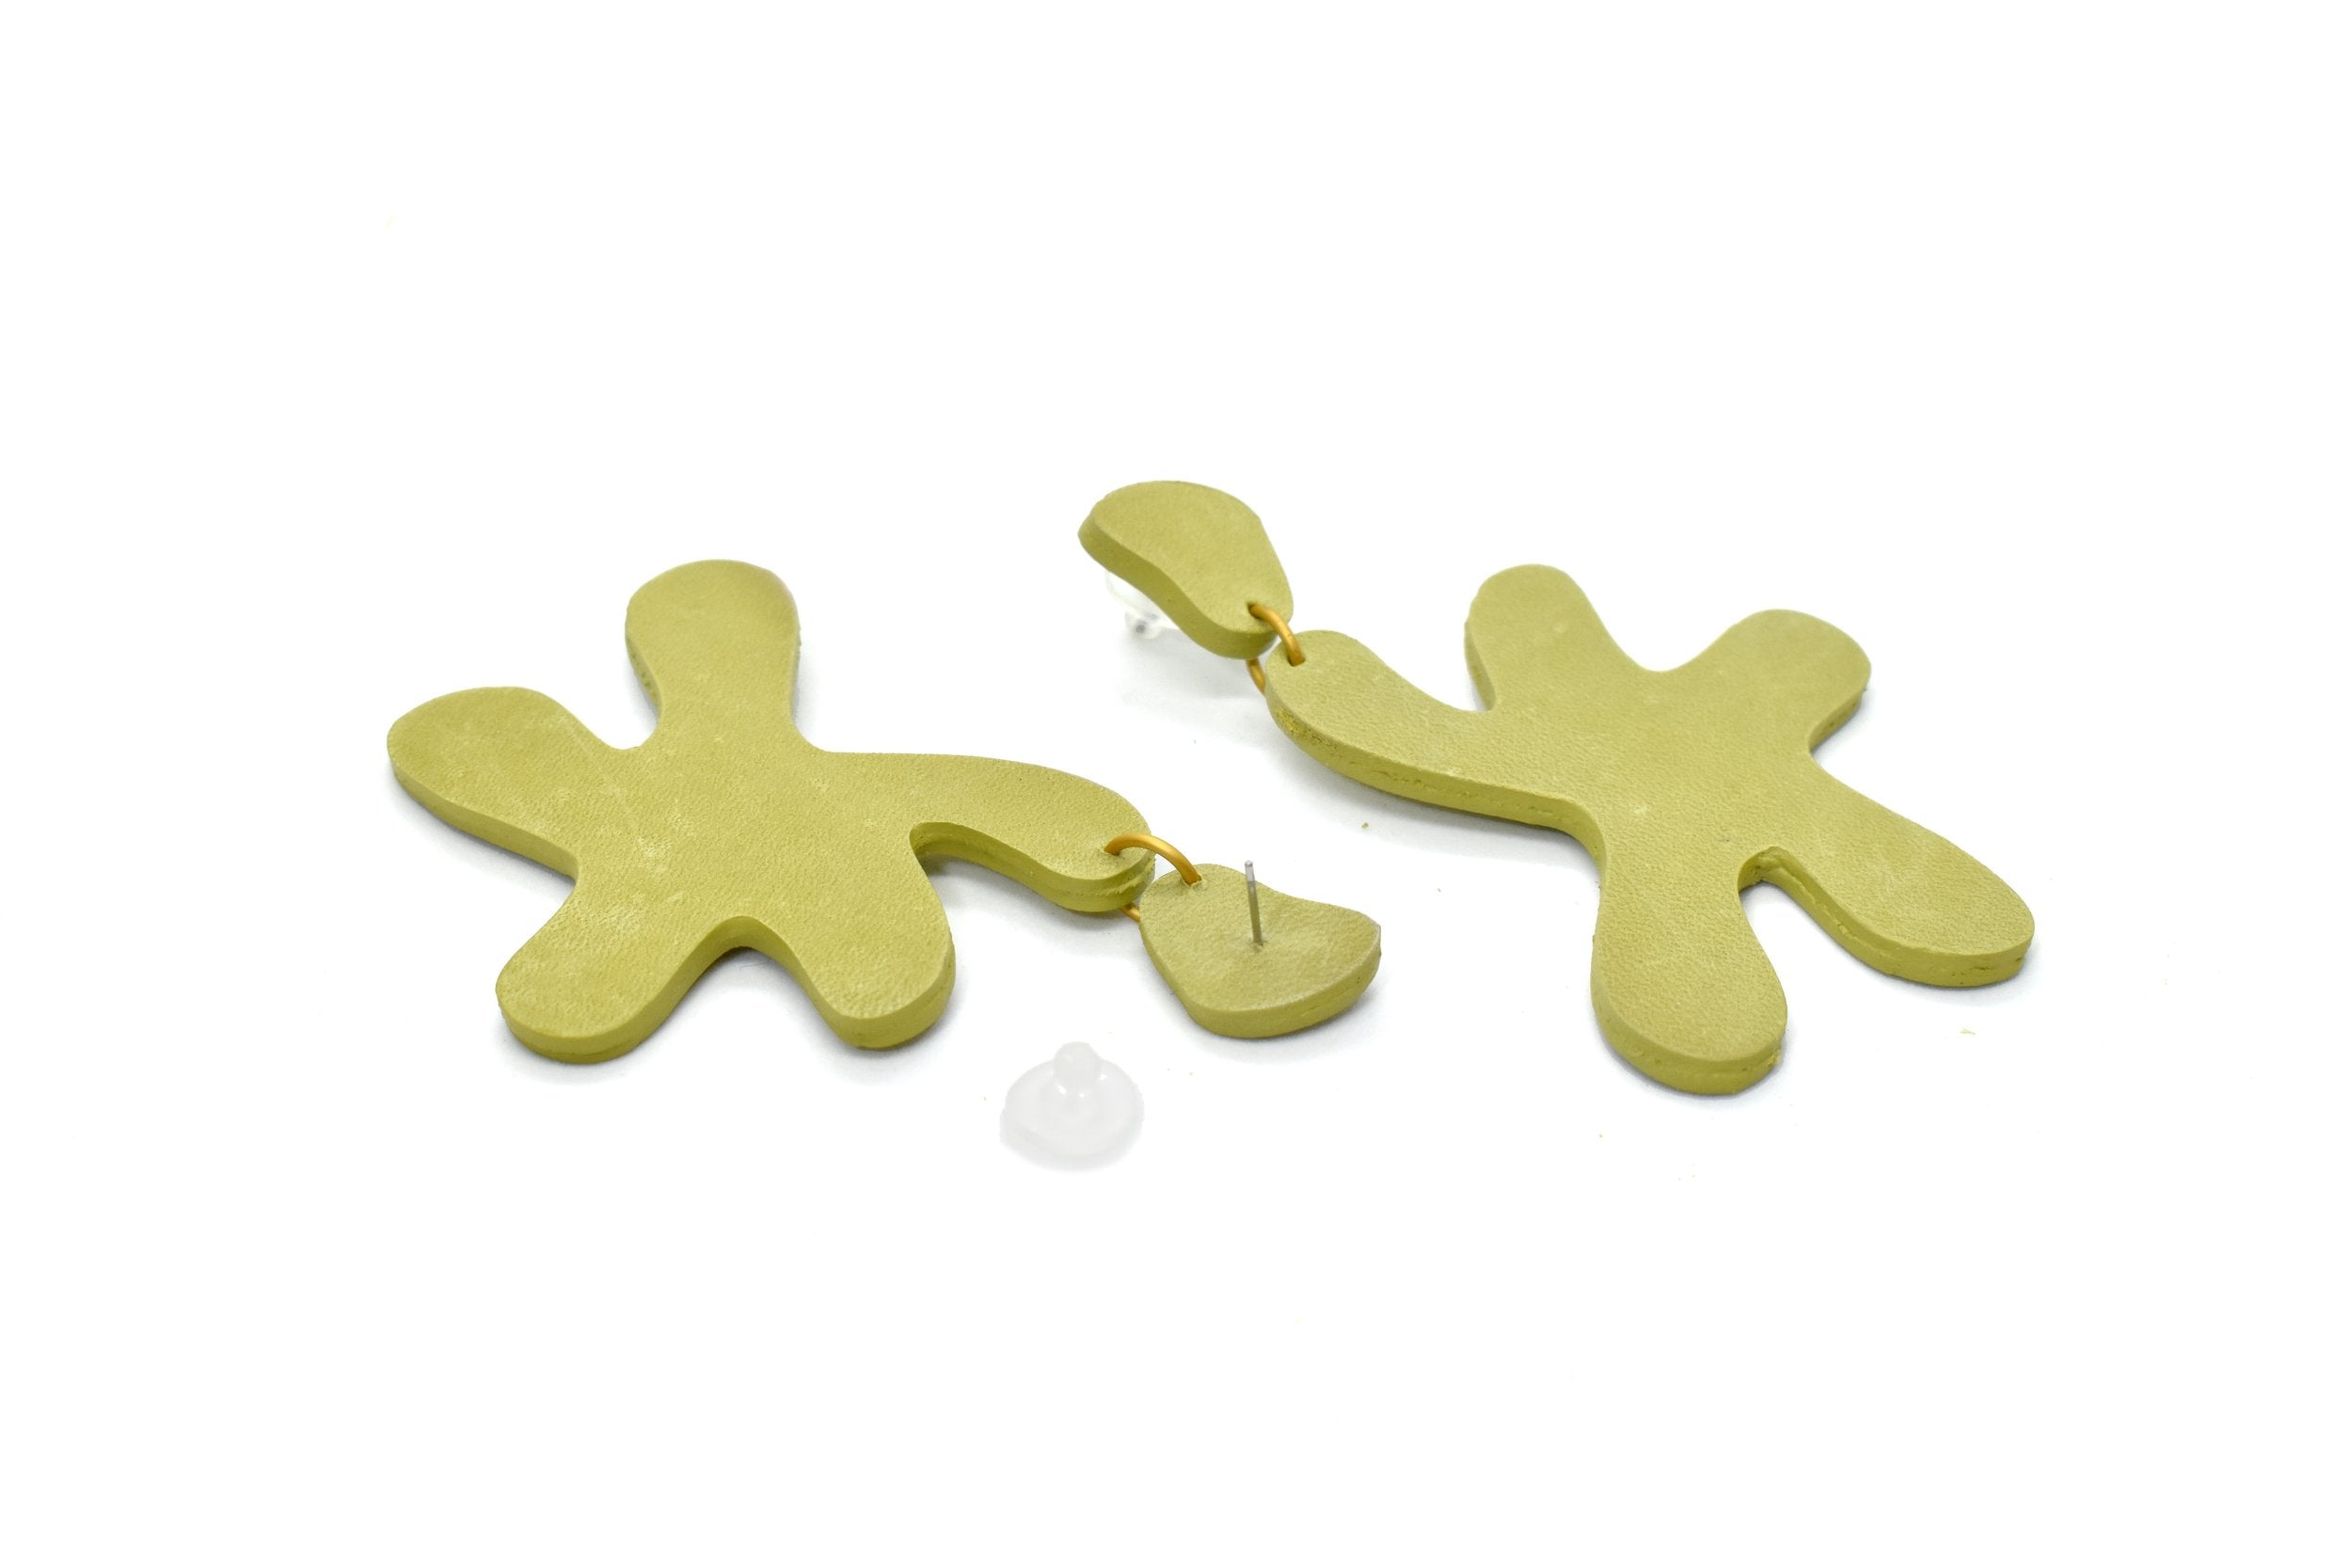 lime green accessories that are star shaped statement earrings made of real leather in chartreuse style